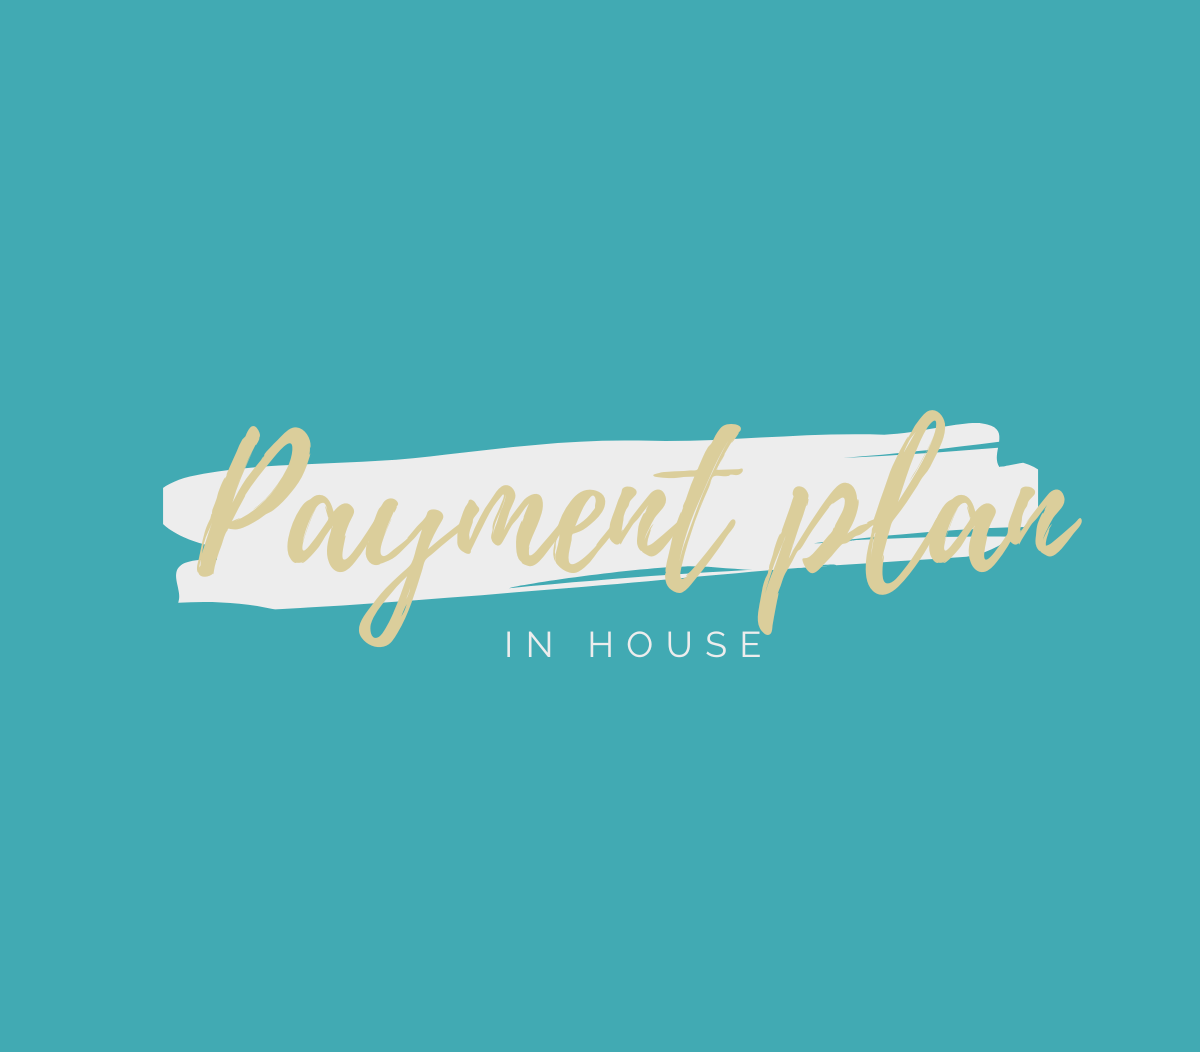 In house payment plan